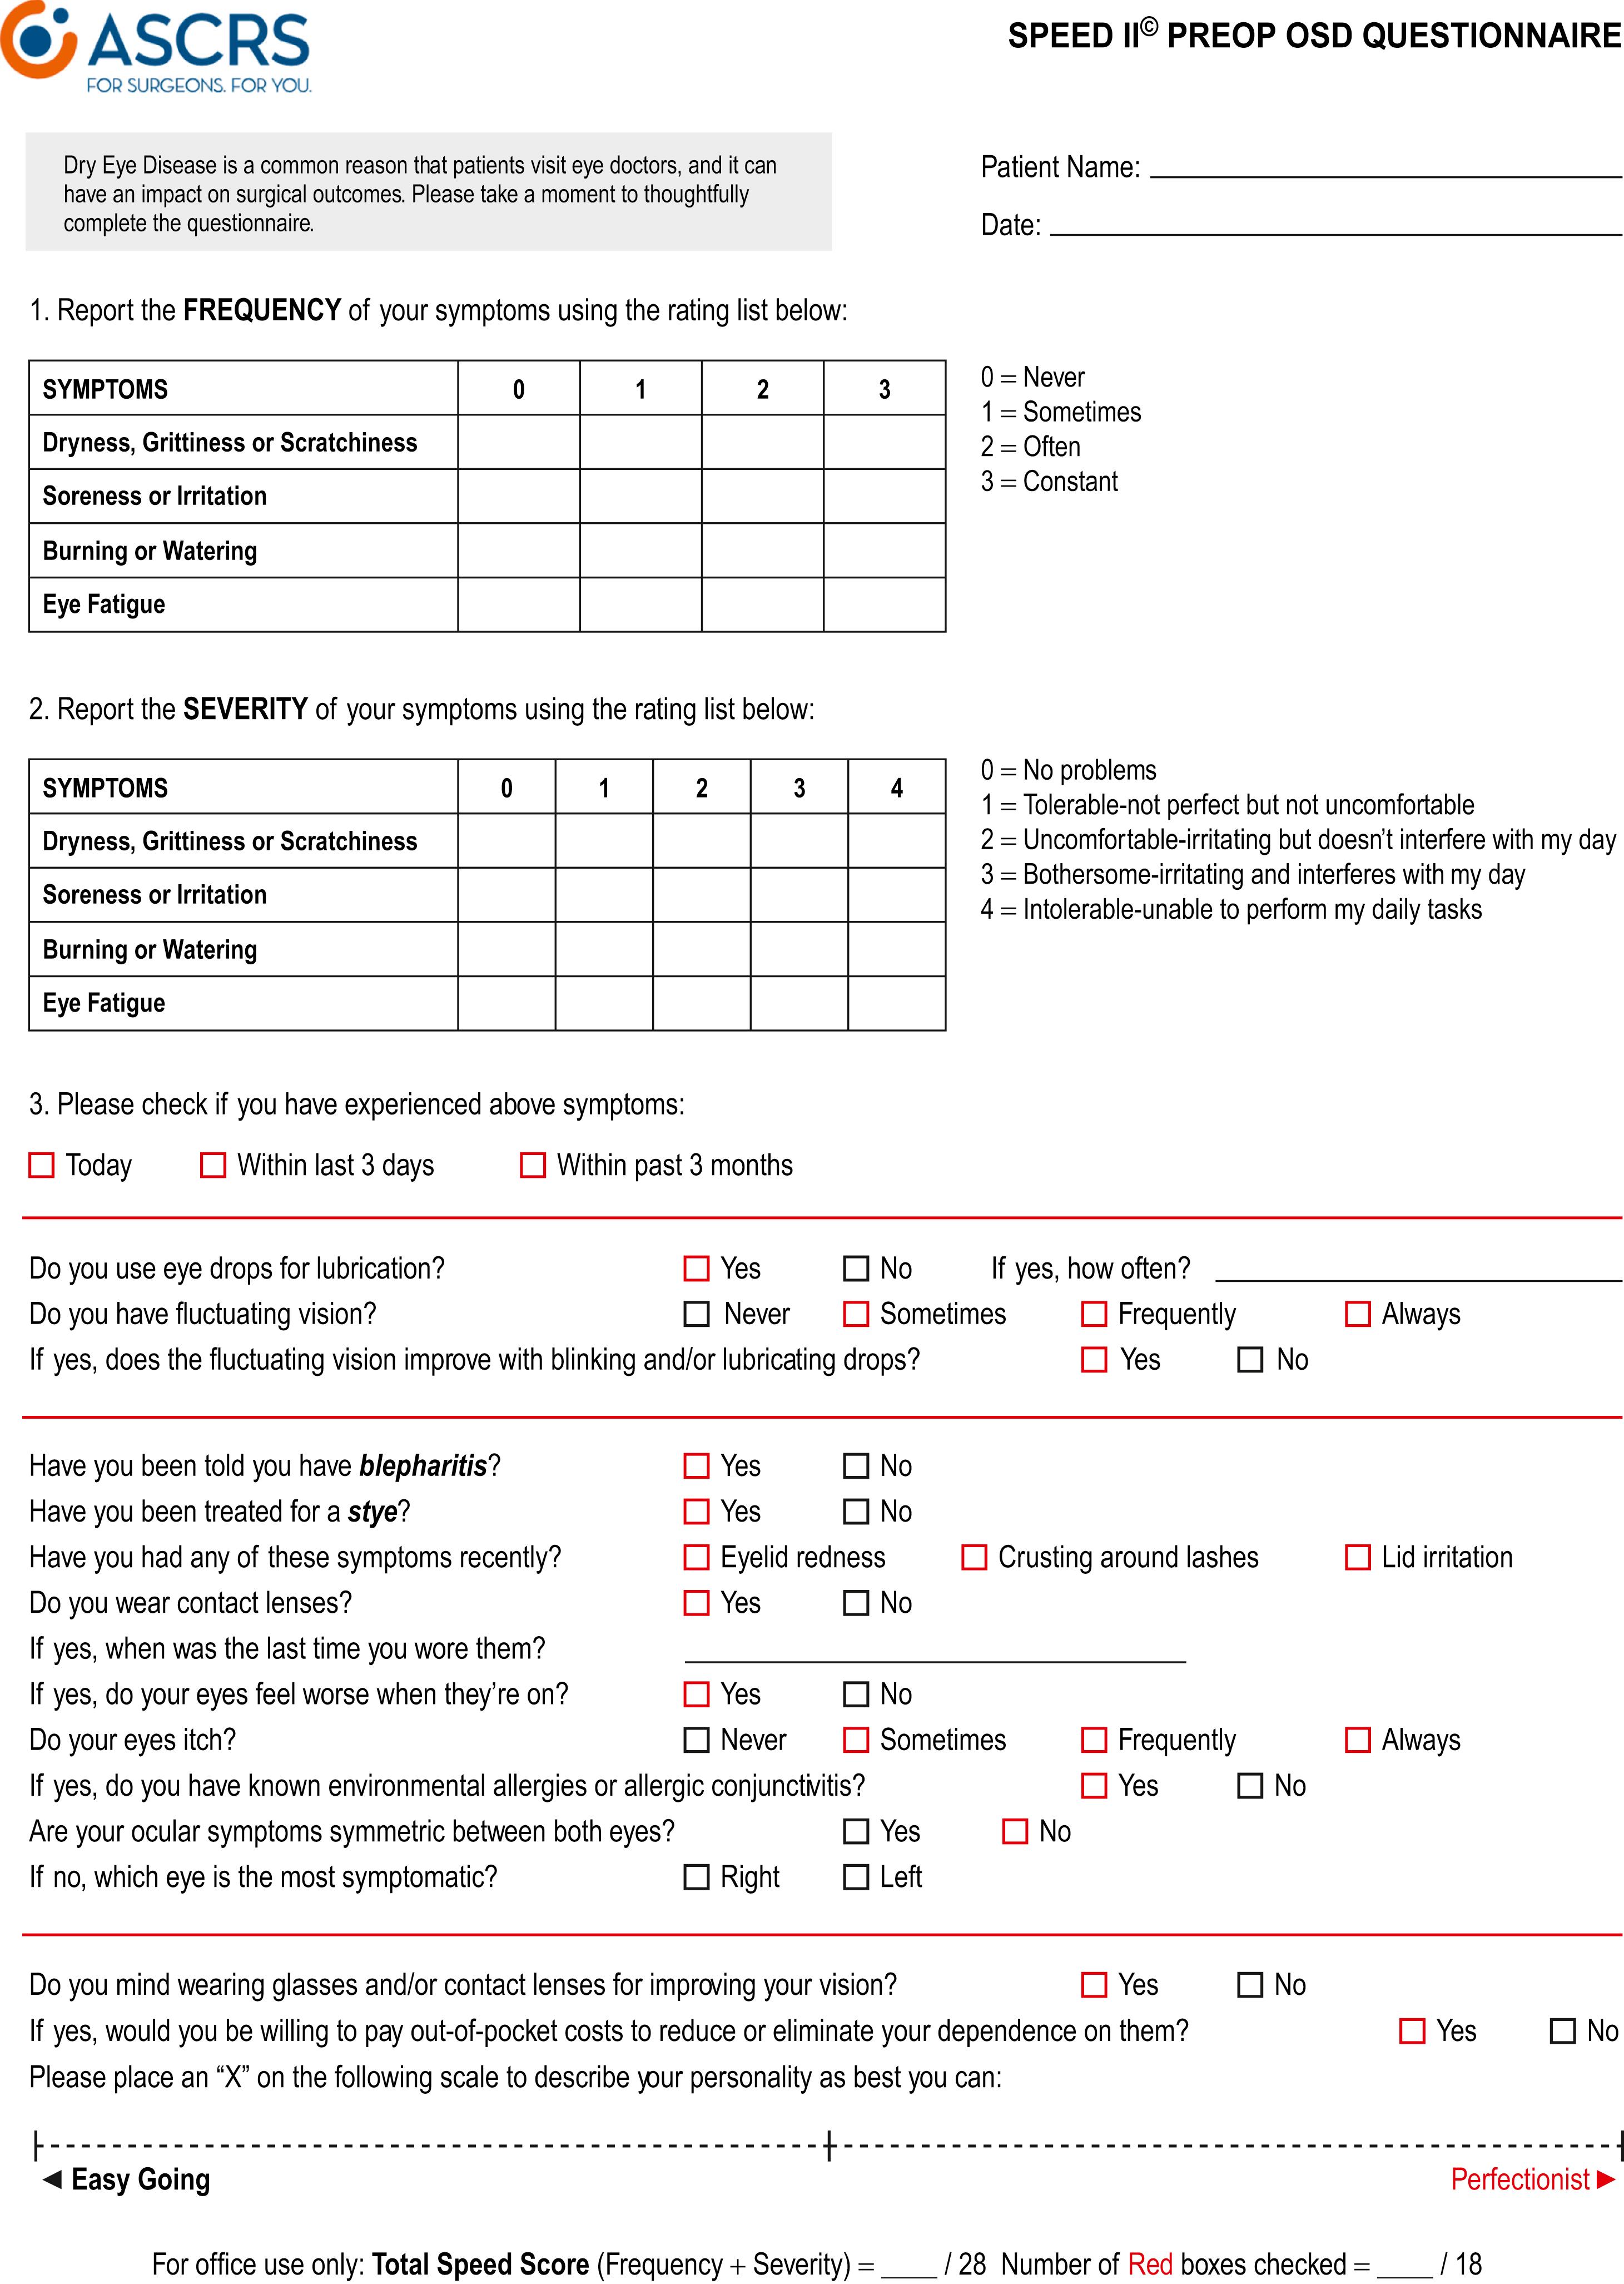 Fig. 31.4, ASCRS SPEED II preoperative ocular surface disease questionnaire.